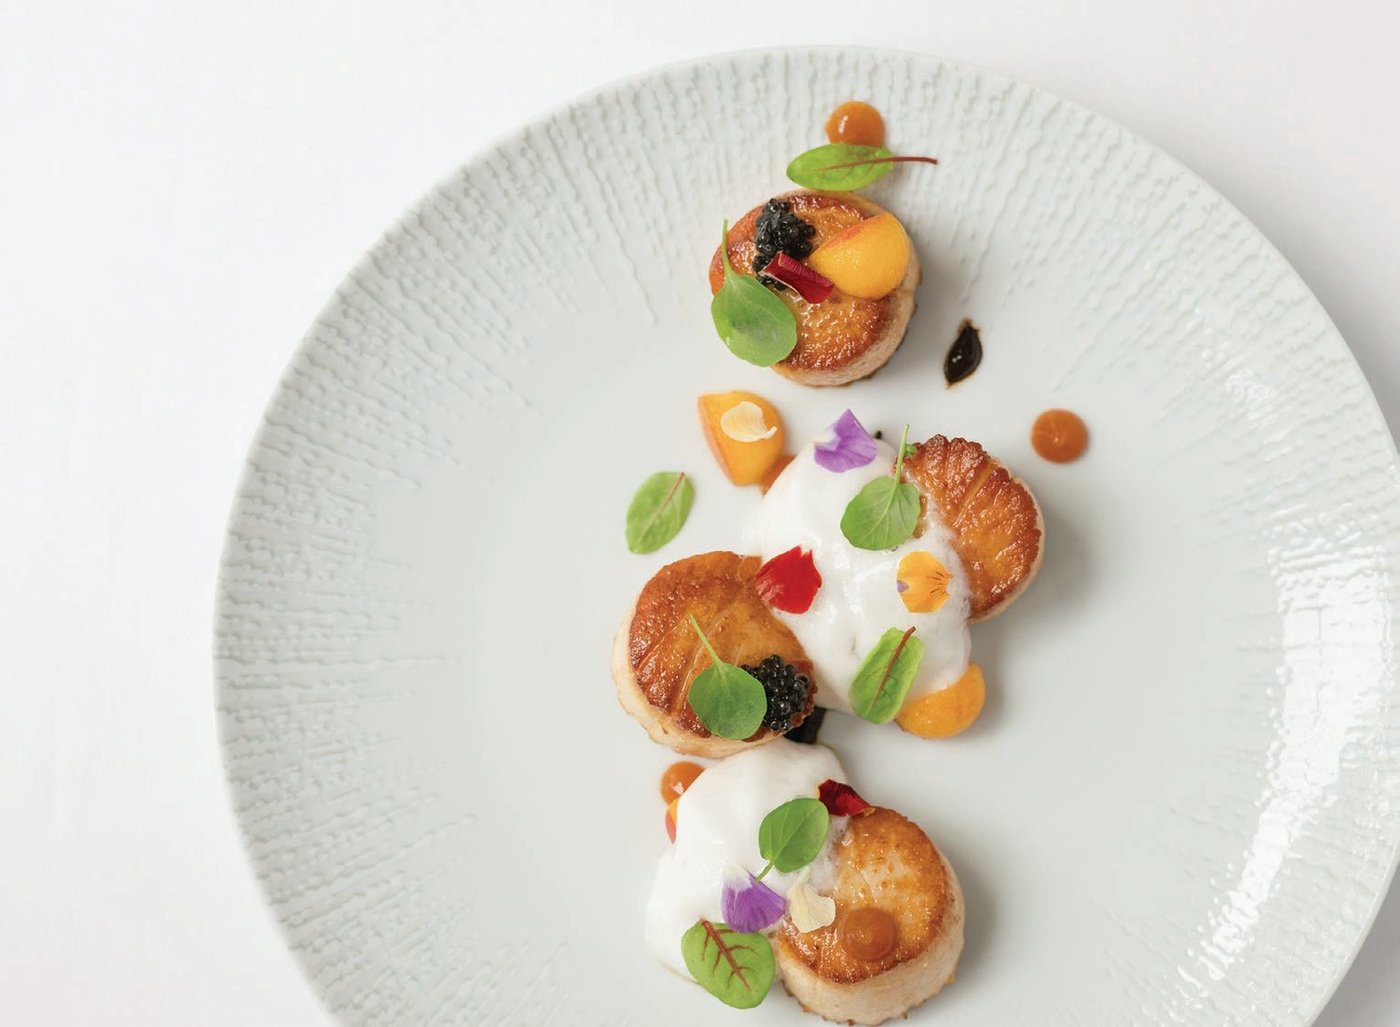 Cuvée’s culinary team sources locally for its menu, including its scallops. PHOTO COURTESY OF THTE CHATHAM INN